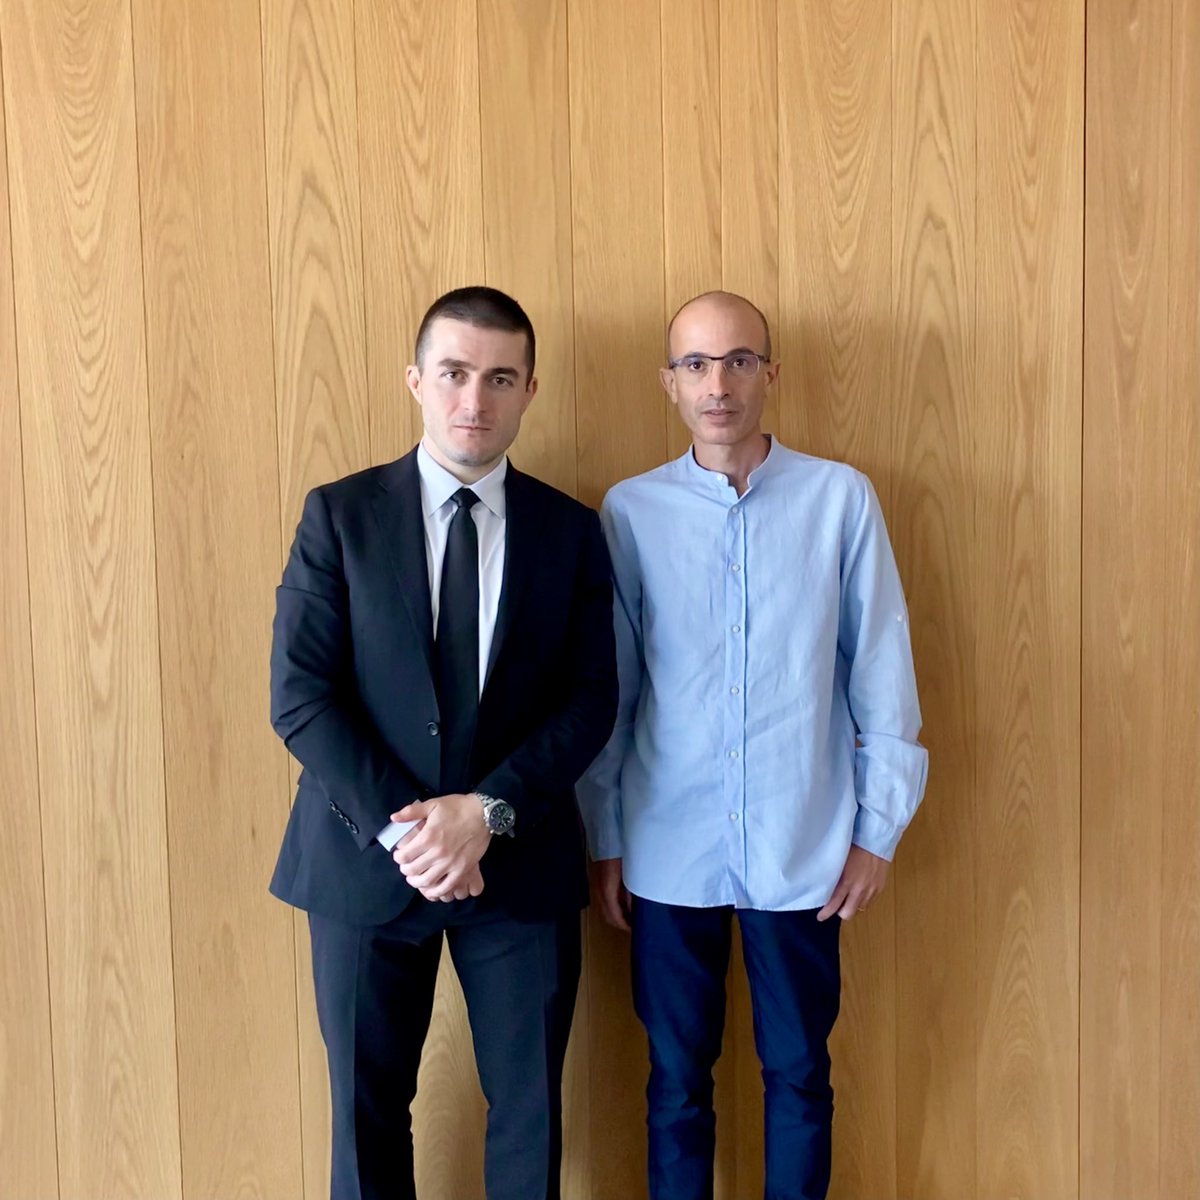 Today I had the pleasure of hosting @lexfridman at #sapienship HQ, for an extensive conversation on a wide range of big topics. Stay tuned for his podcast episode very soon.

#longformcontent